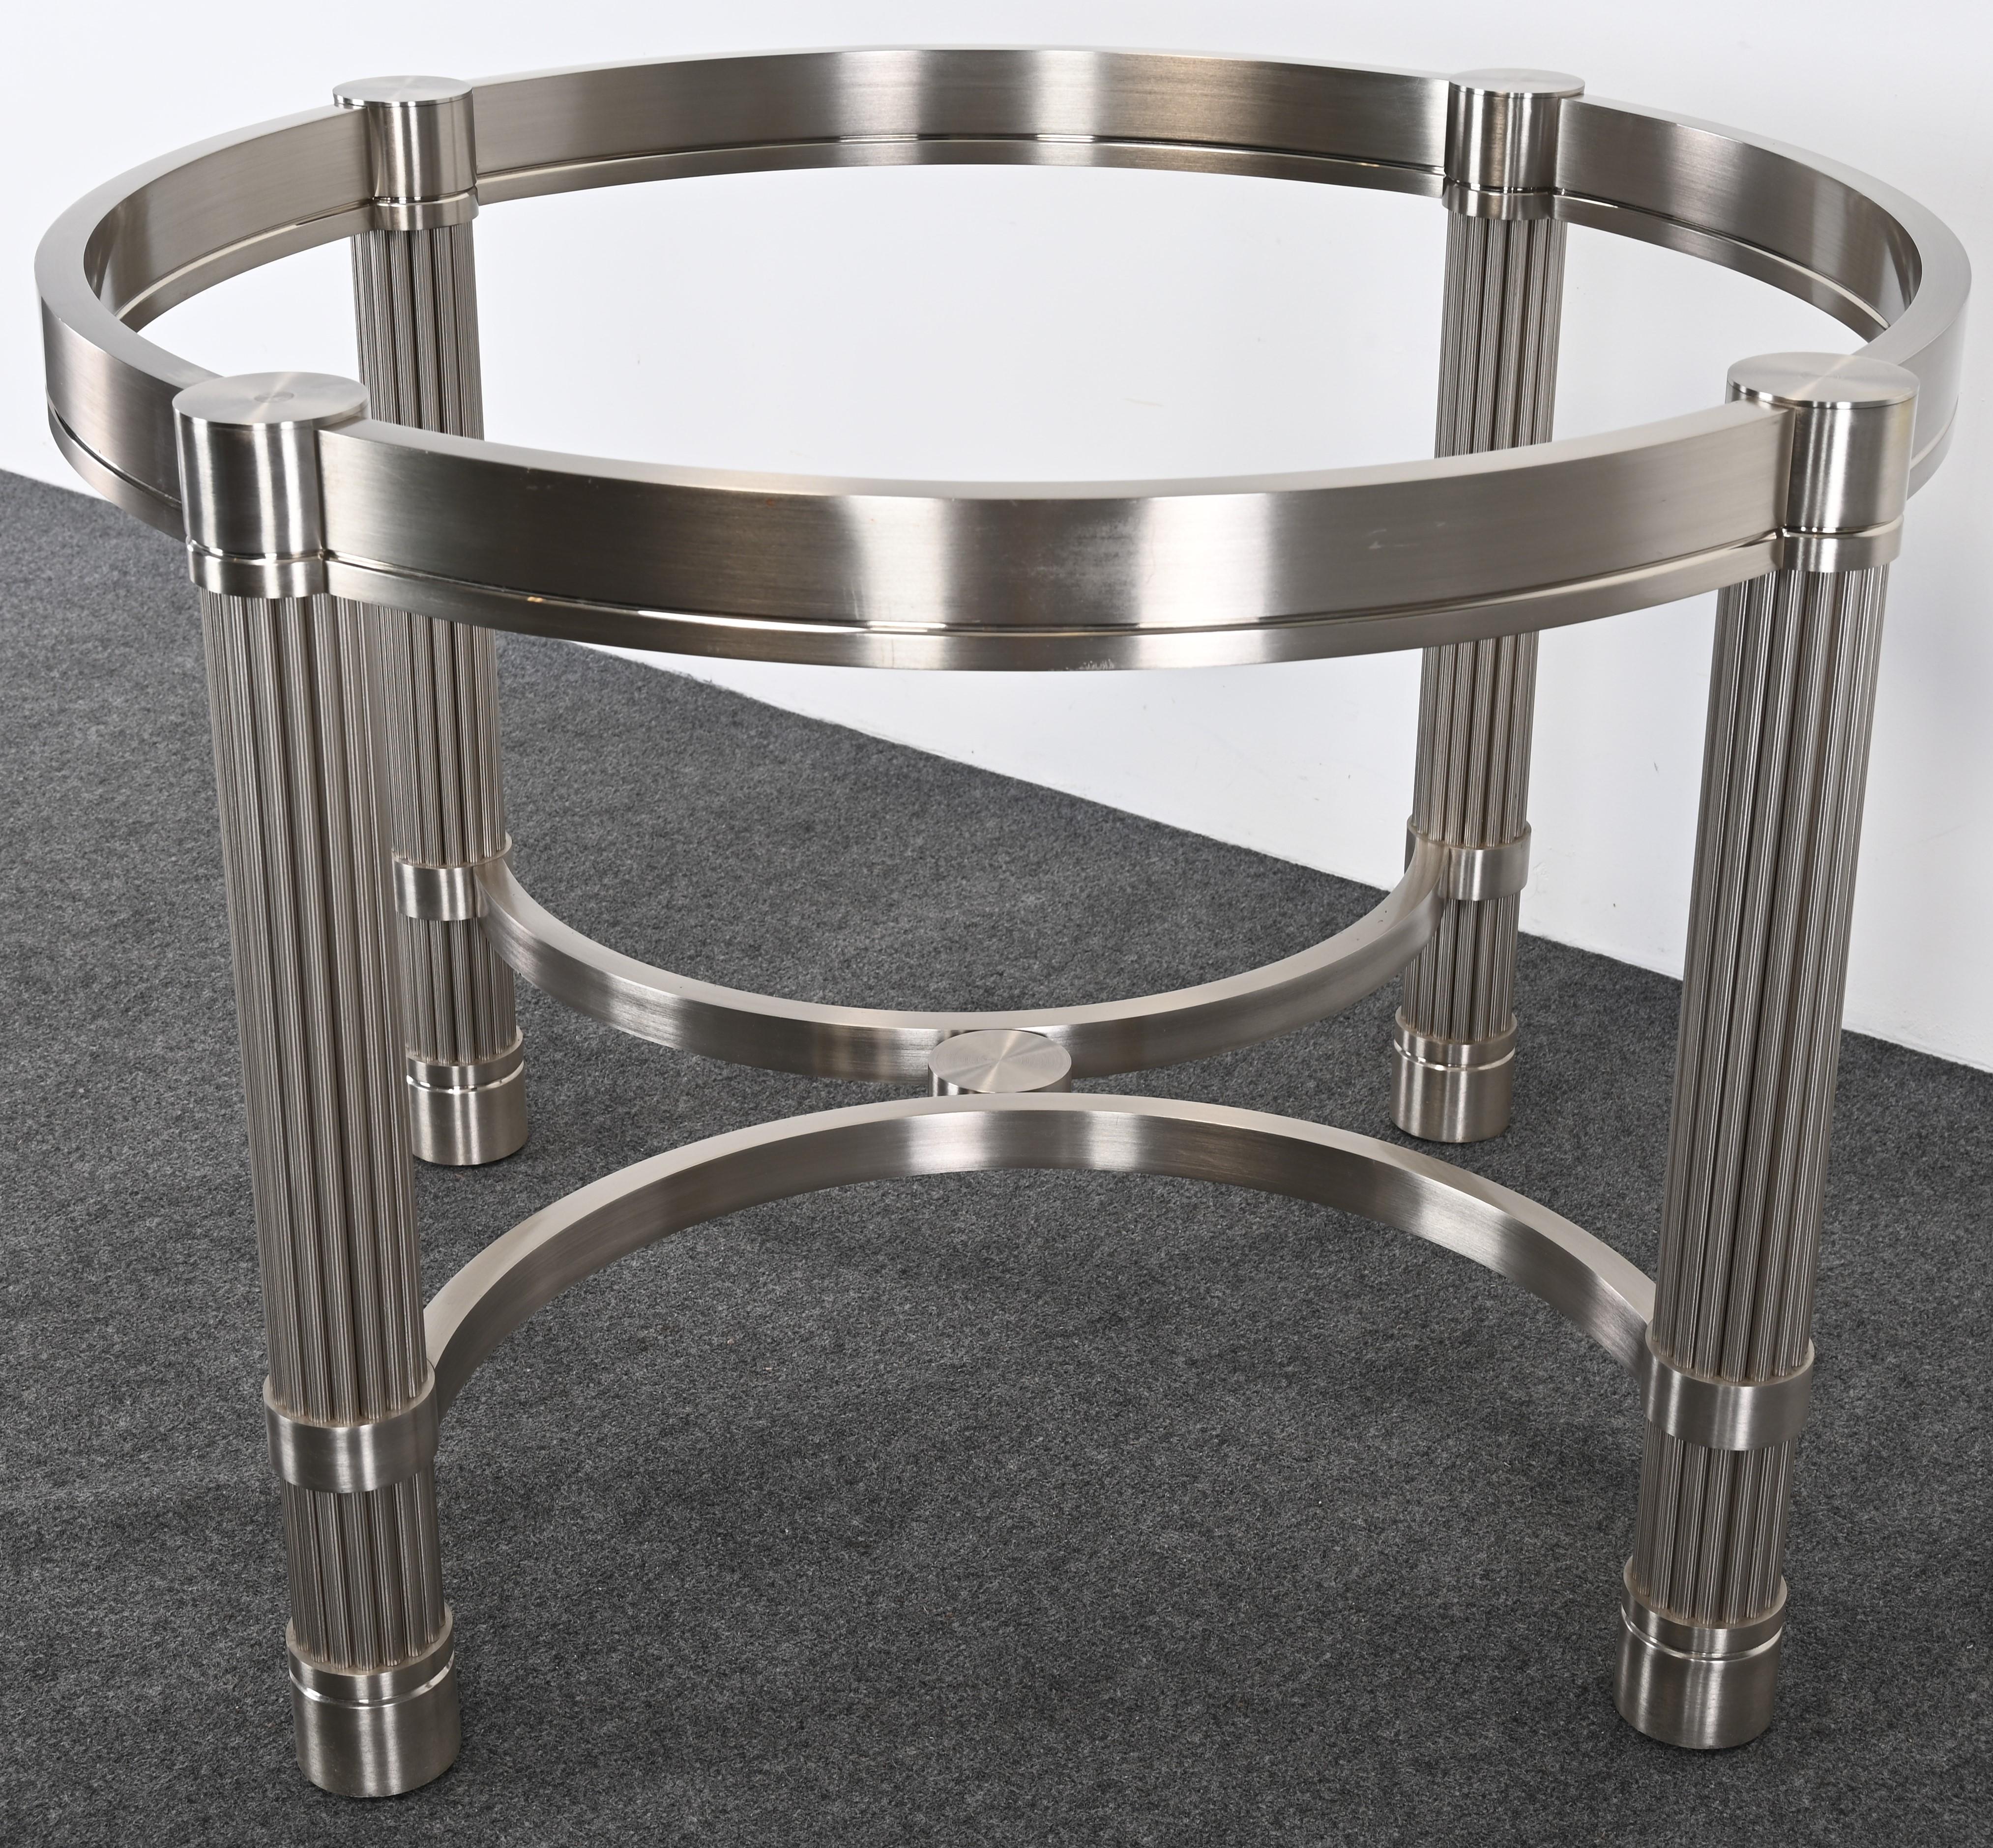 Solid Stainless Steel Center or Dining Table by Ron Seff, 1980s For Sale 6